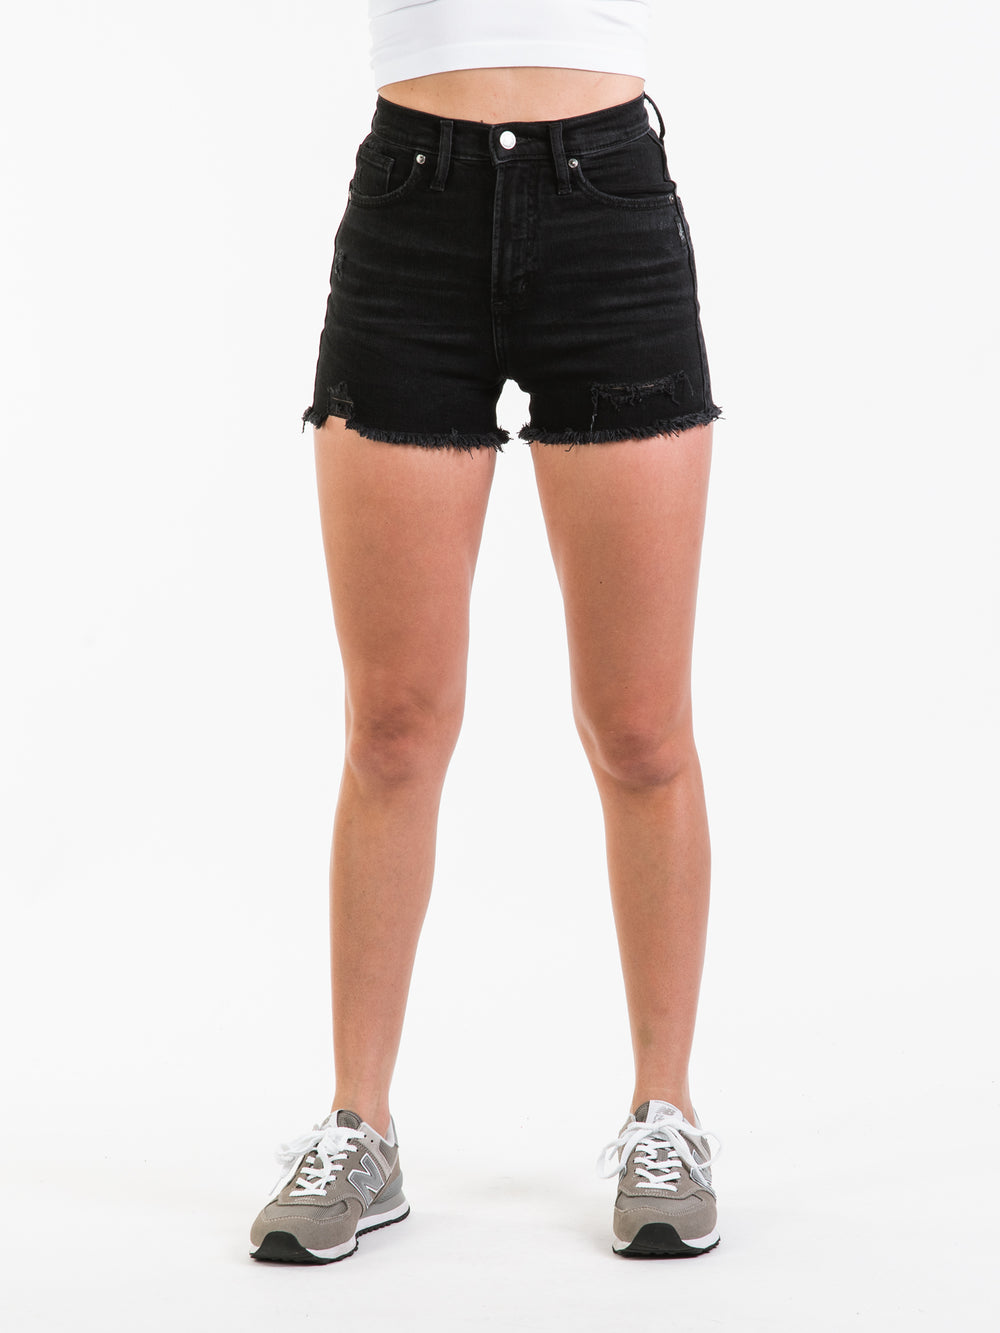 SILVER JEANS HIGH RISE HIGHLY DESIRABLE SHORT - CLEARANCE